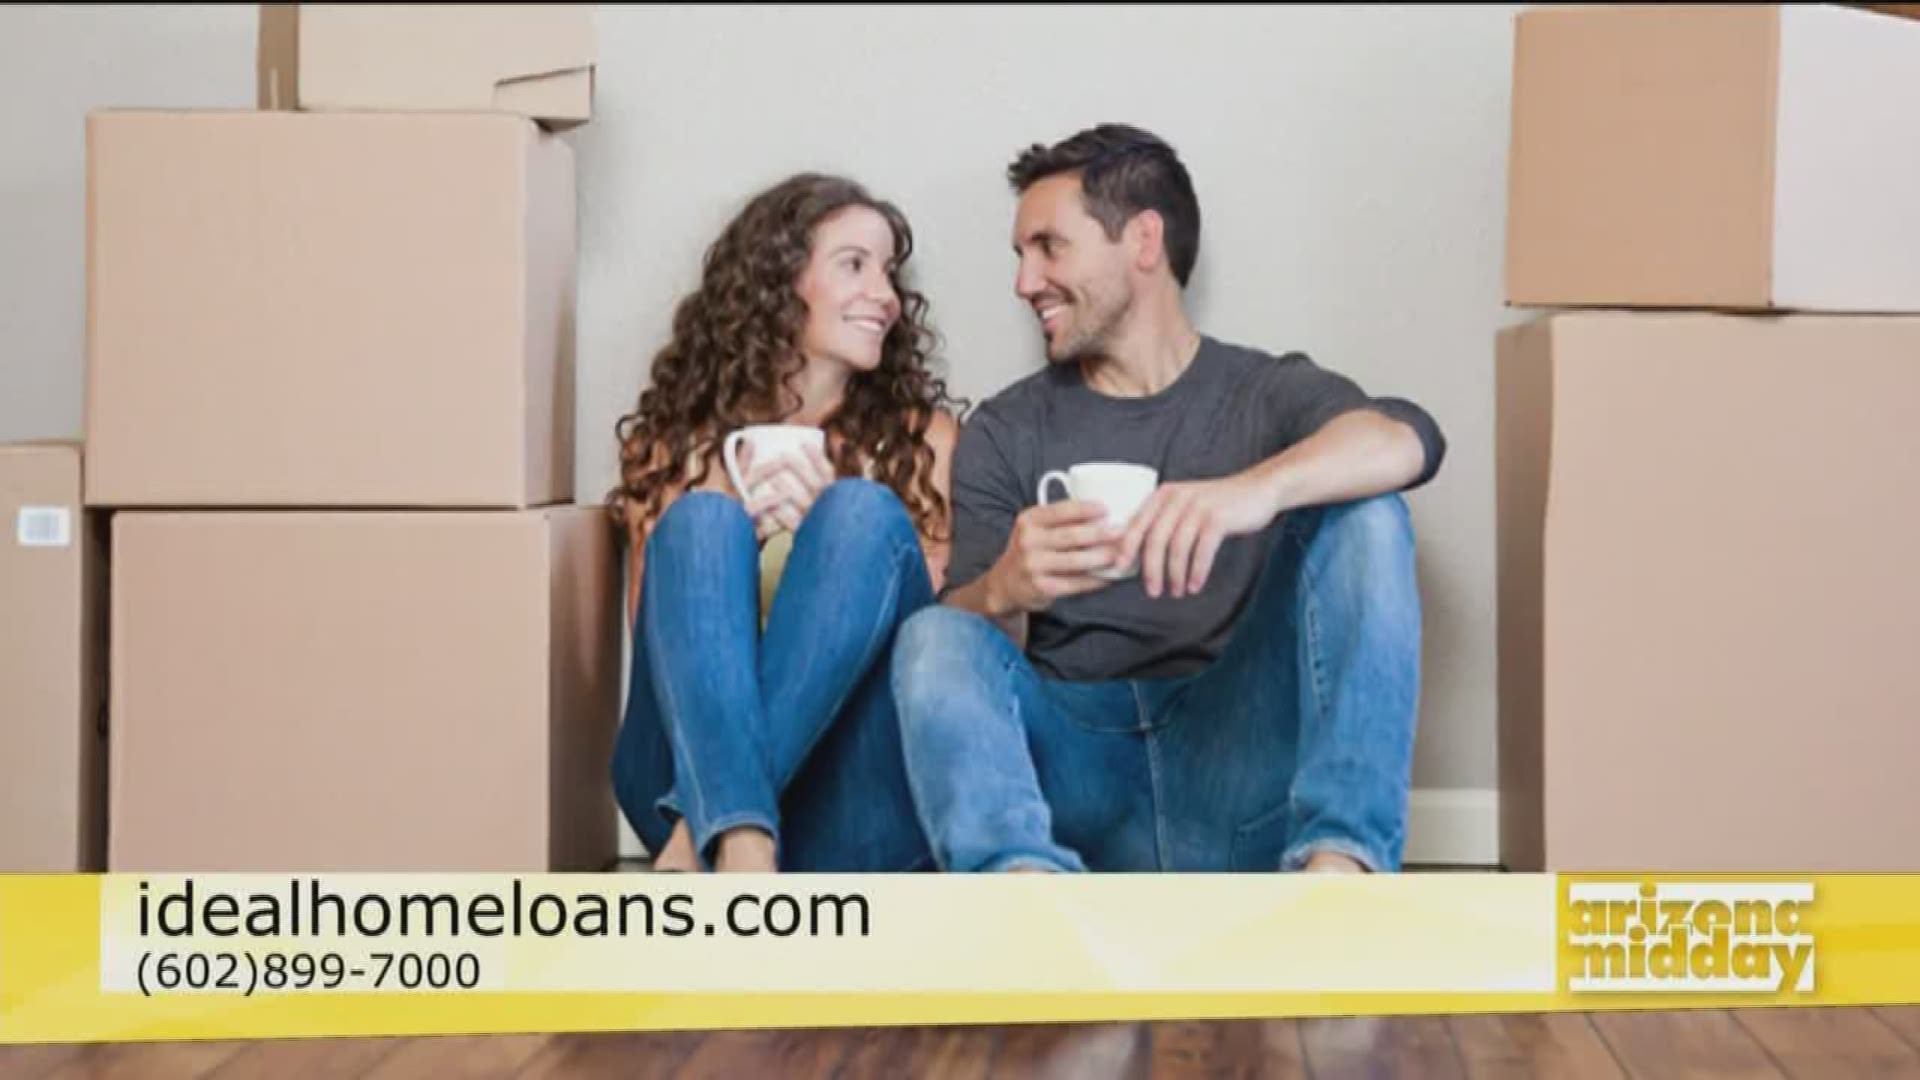 Brent Ivinson with Ideal Home Loans tells us about the current rates and how you can get mortgage help online